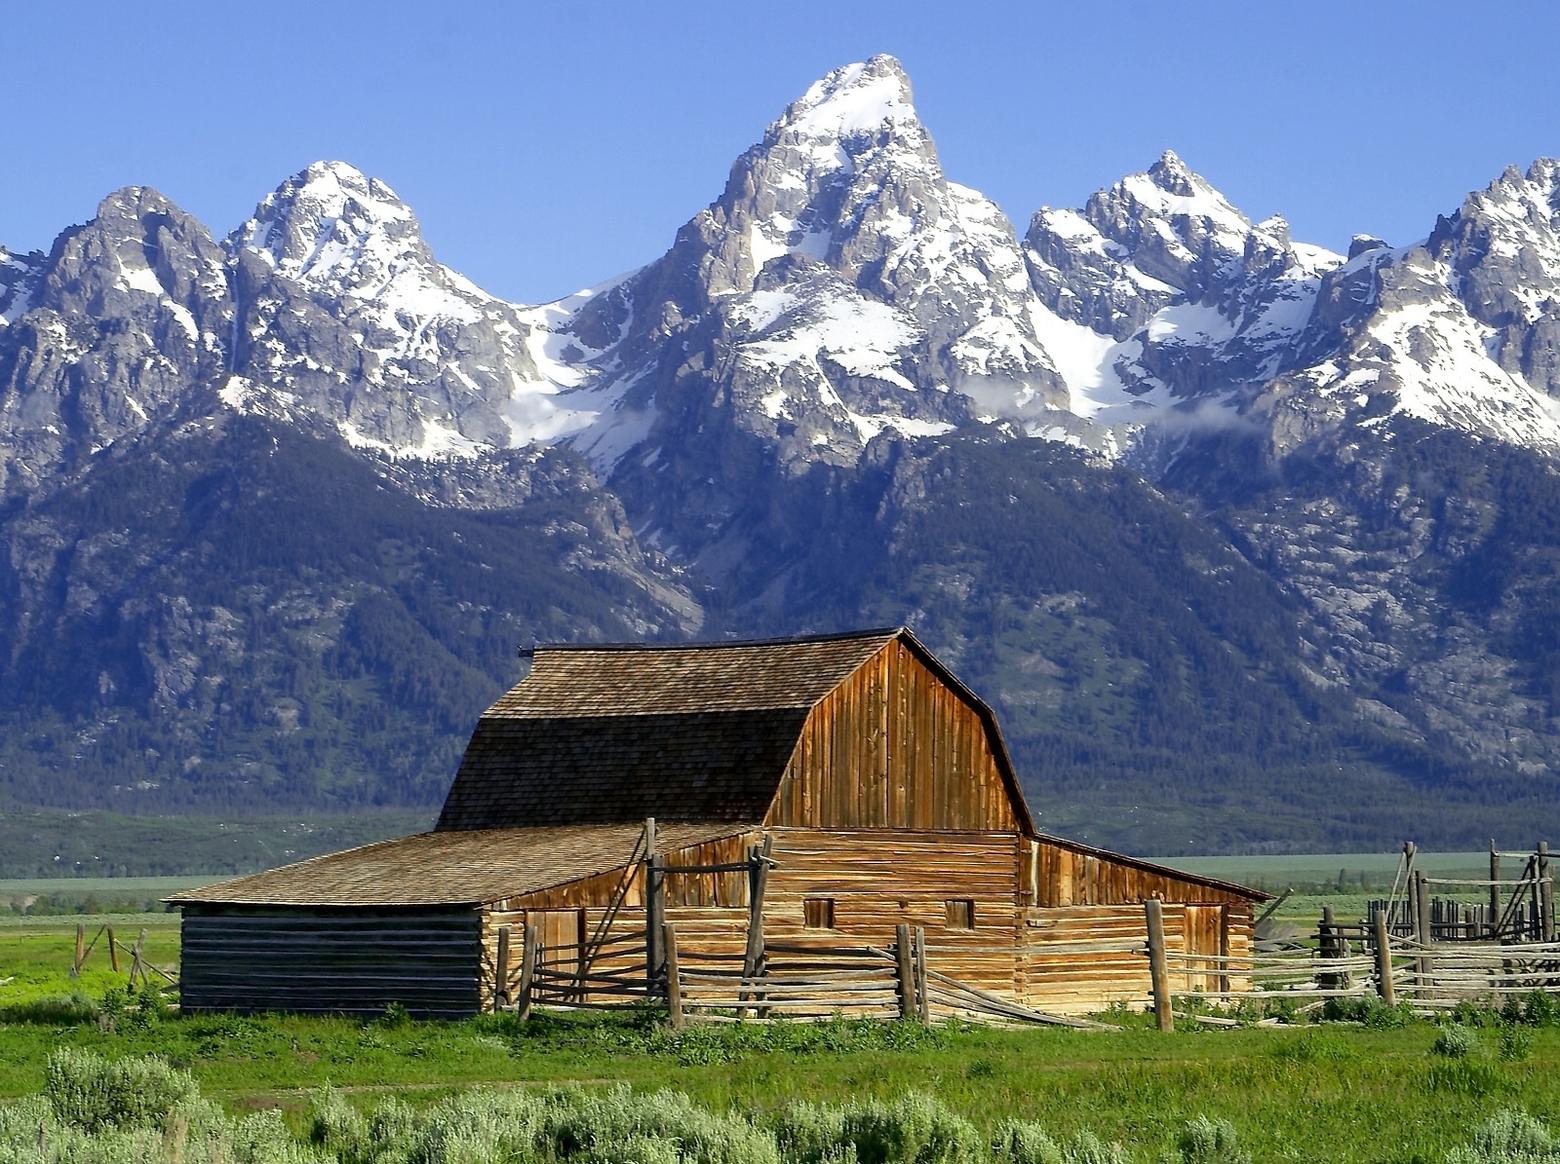 Moulton Barn fronts the Tetons in Grand Teton National Park. Protected lands, wildlife and a healthy environment have fueled Teton County becoming one of the richest counties in America.  A national park that started as a national monument, Grand Teton is a bold example of  the long-term dividends of conservation as opposed to the short-term whims of boom and bust. 